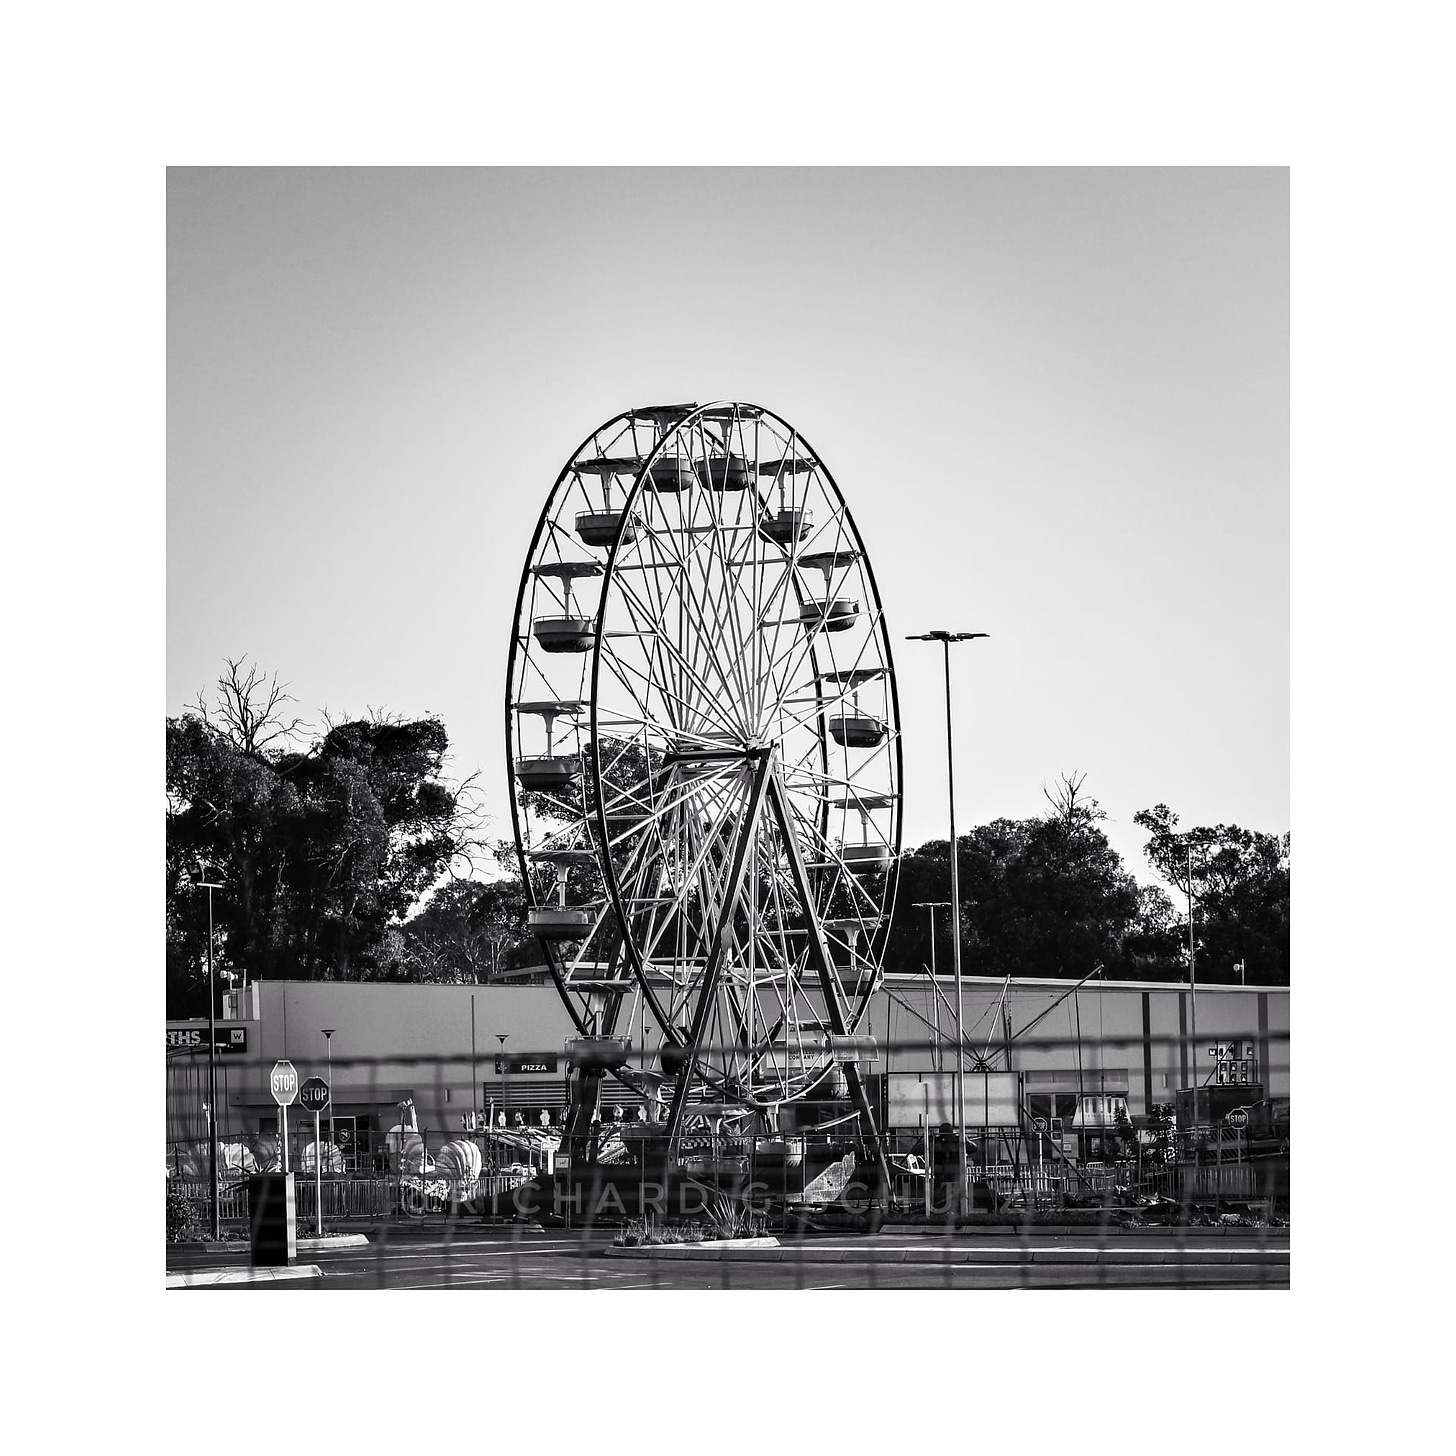 A ferris wheel at a circus. Image in black and white.